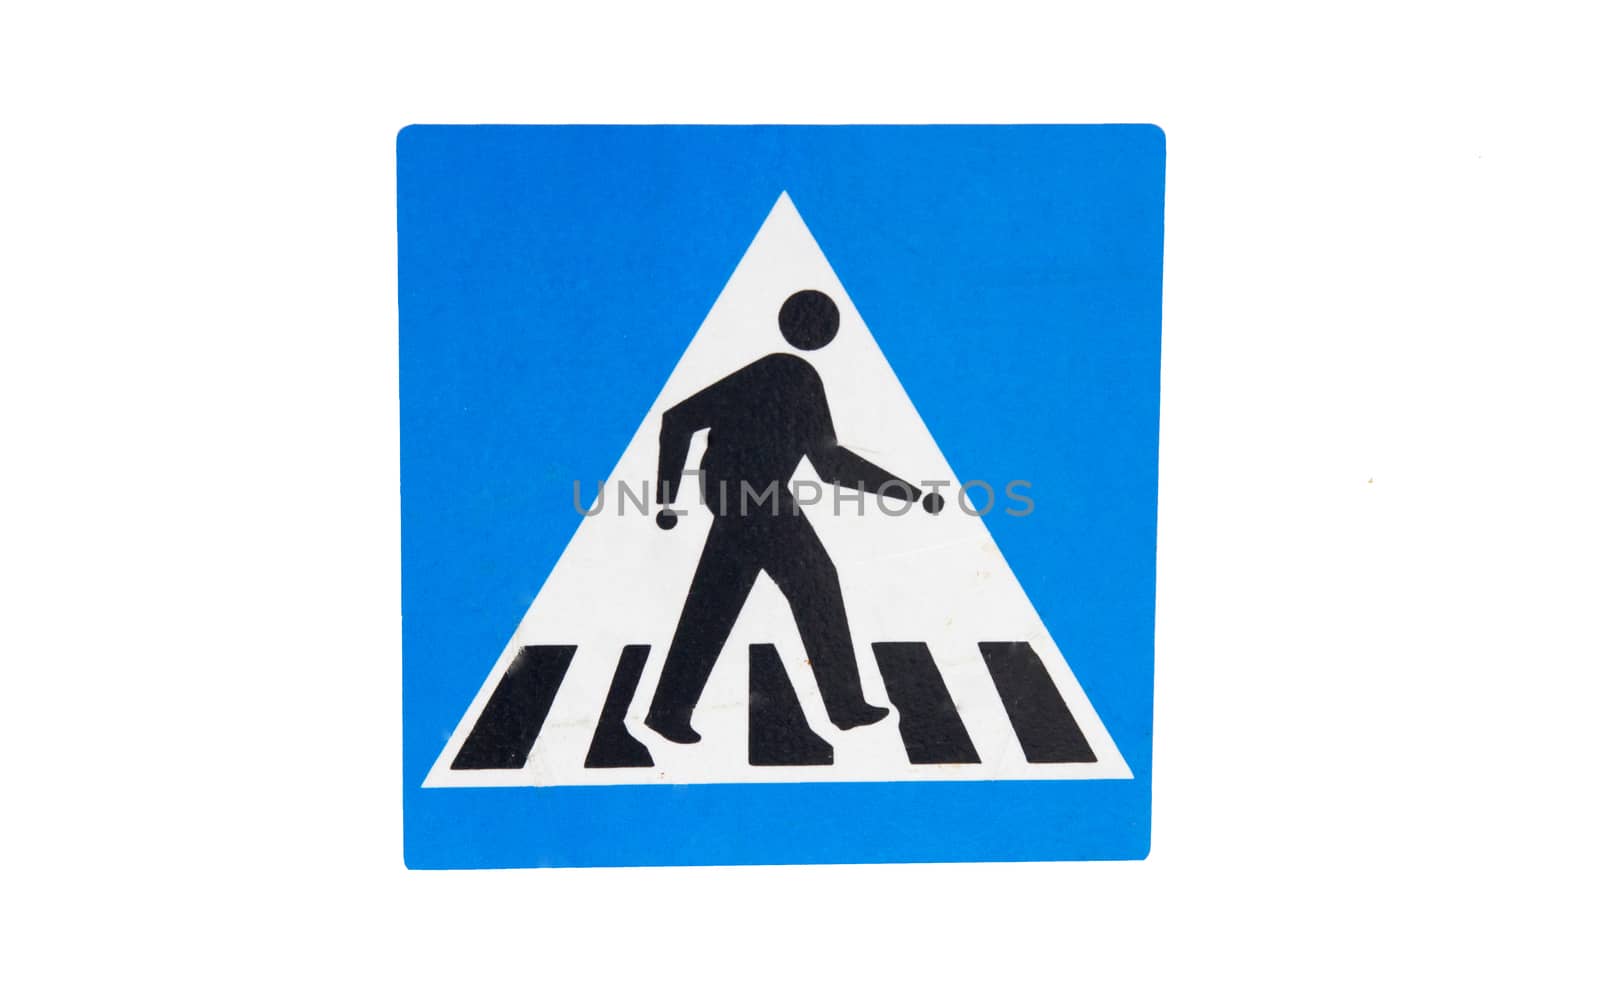 Black,whiite and blue pedestrian crossing sign on white background